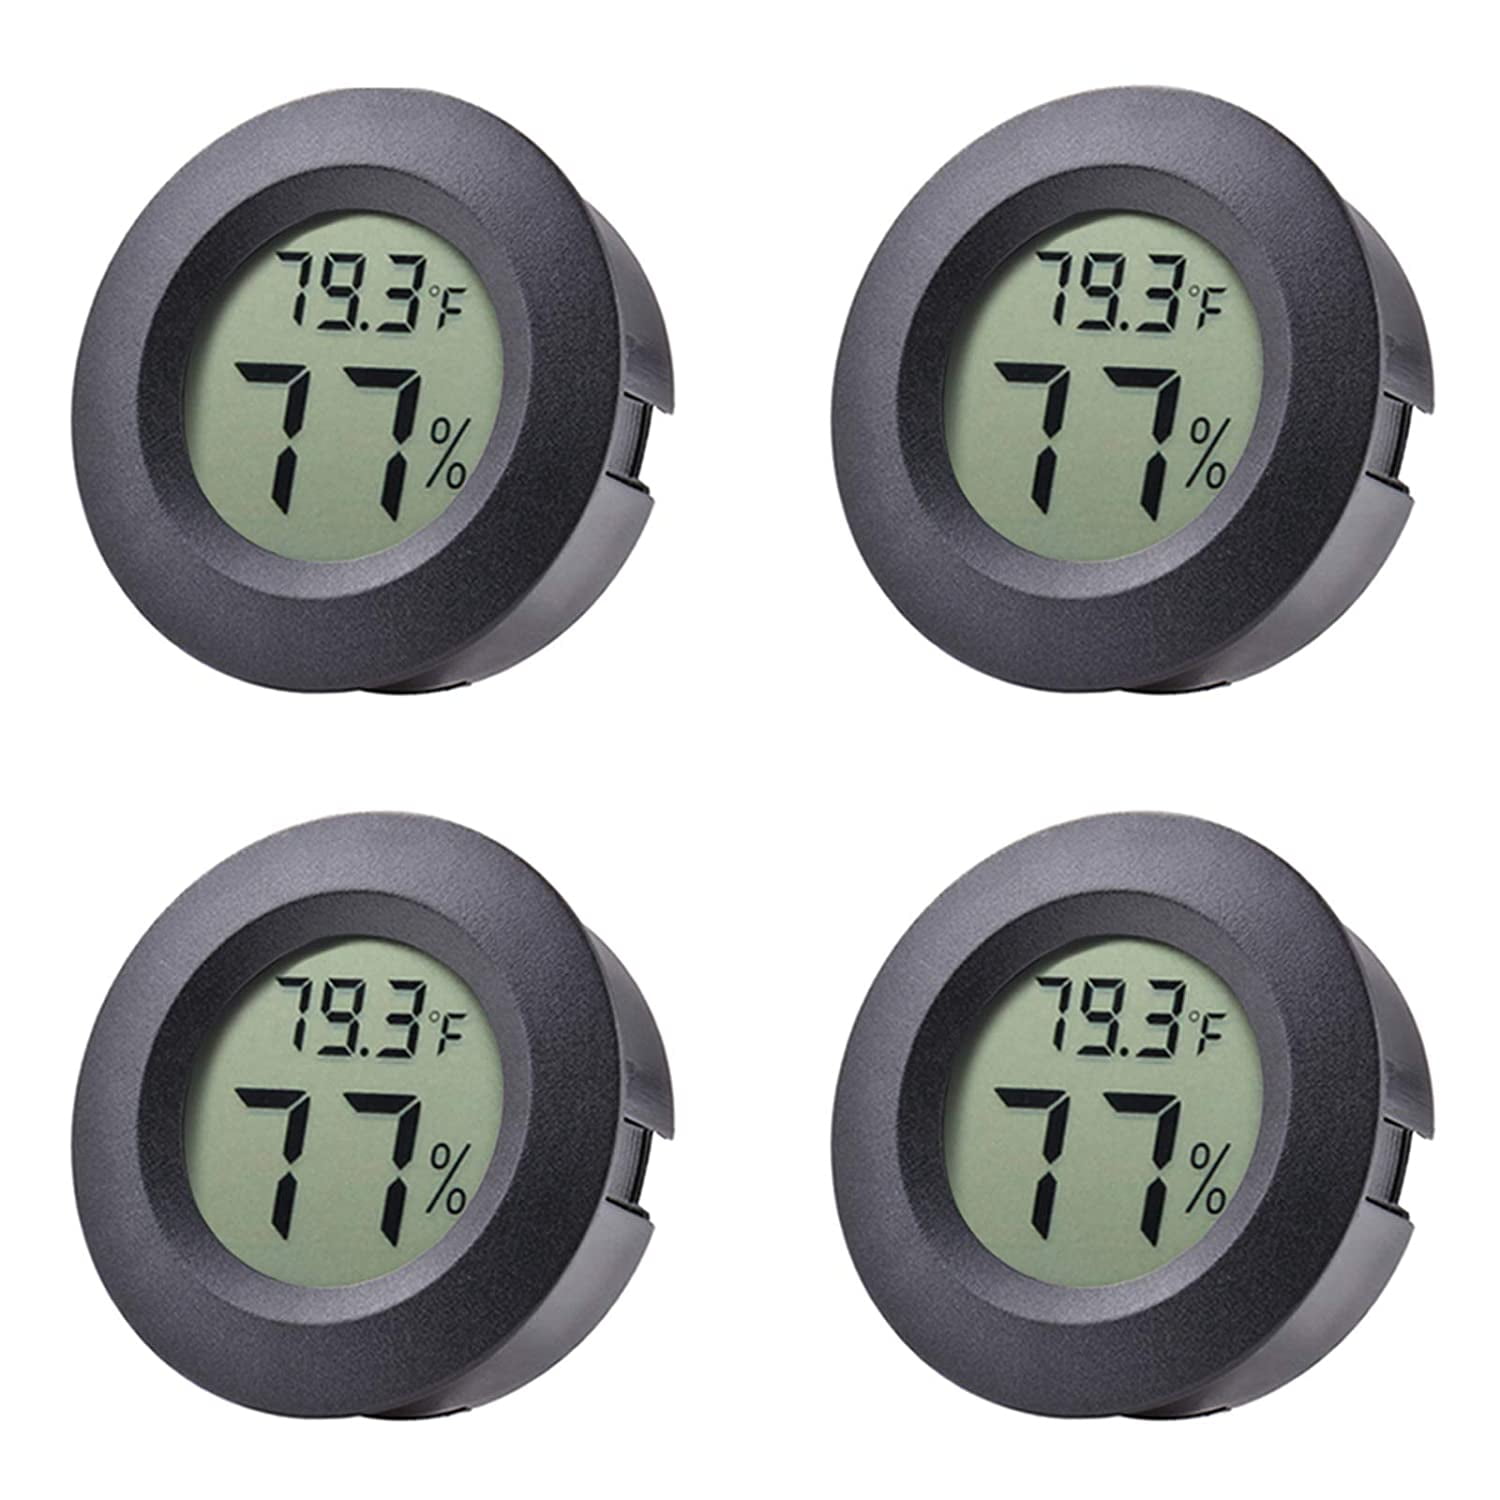 Cellar °C RunSnail Mini Hygrometer Thermometer Indoor Temperature Humidity Meters 8-Pack Digital LCD Display Celsius Greenhouse Garden for Humidors Cars Baby Rooms 